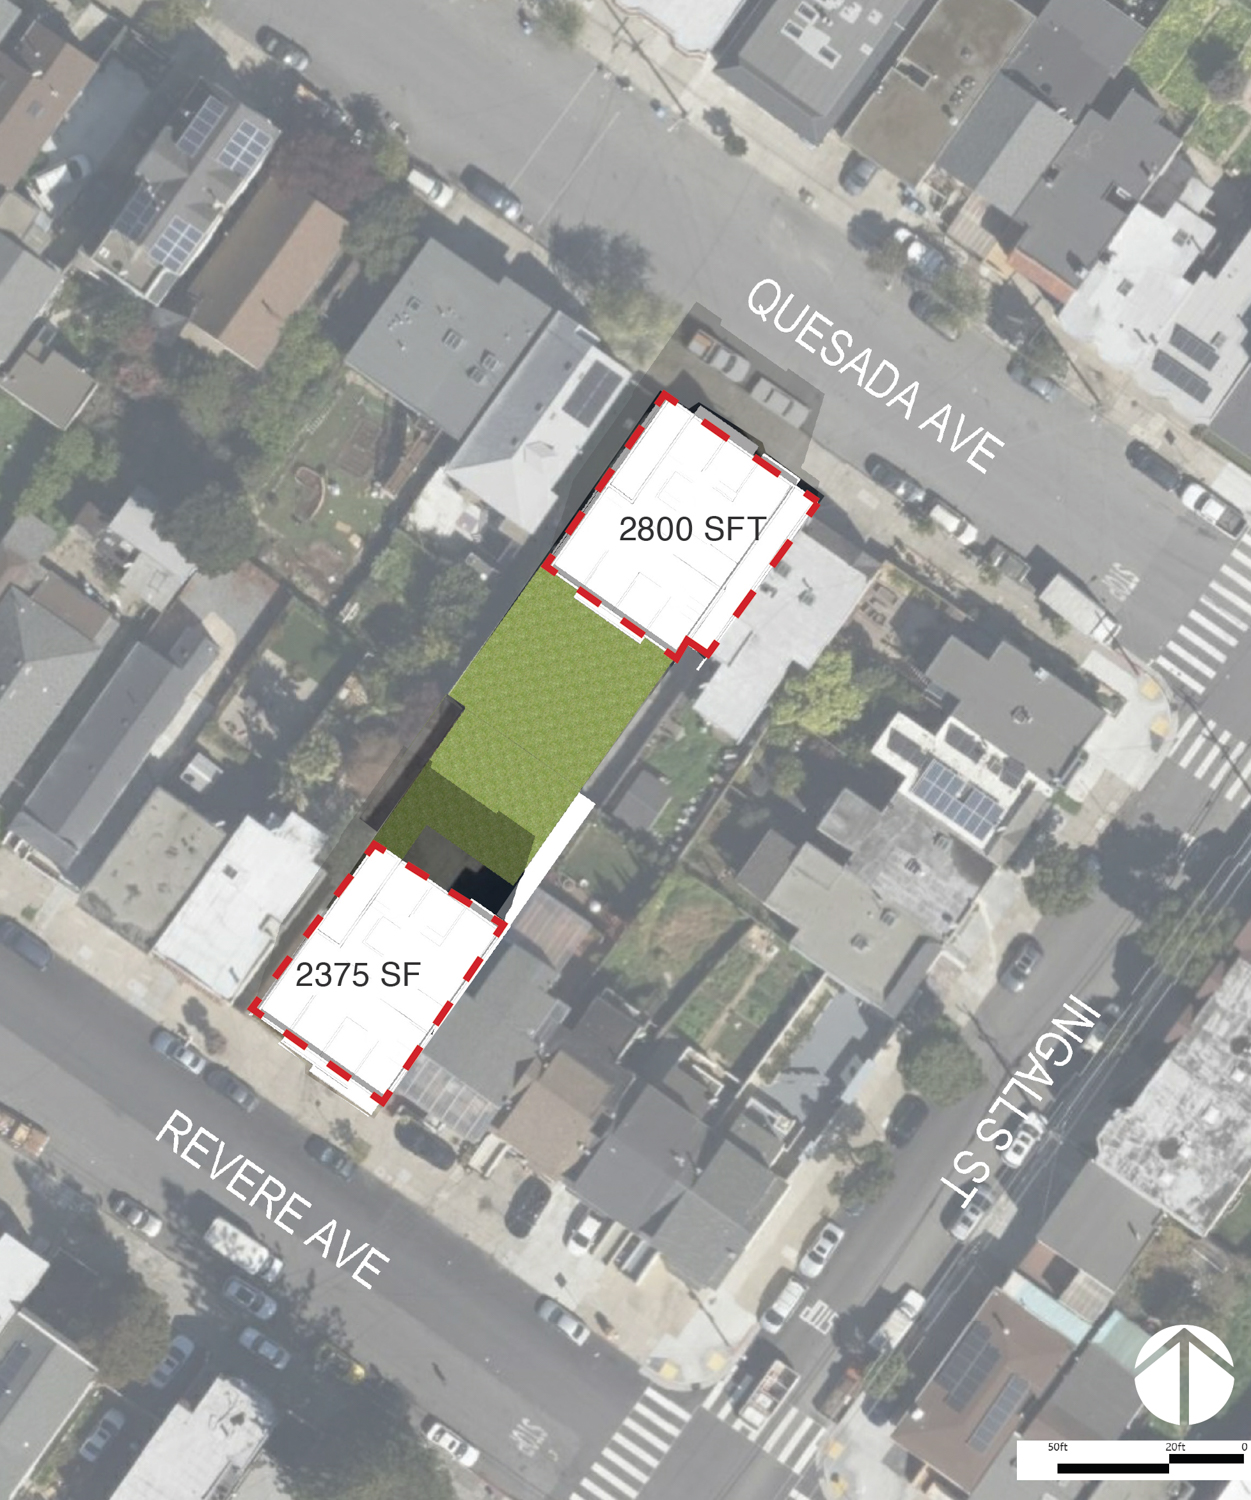 1311 Quesada Avenue site map, illustration by Gelfand Partners Architects